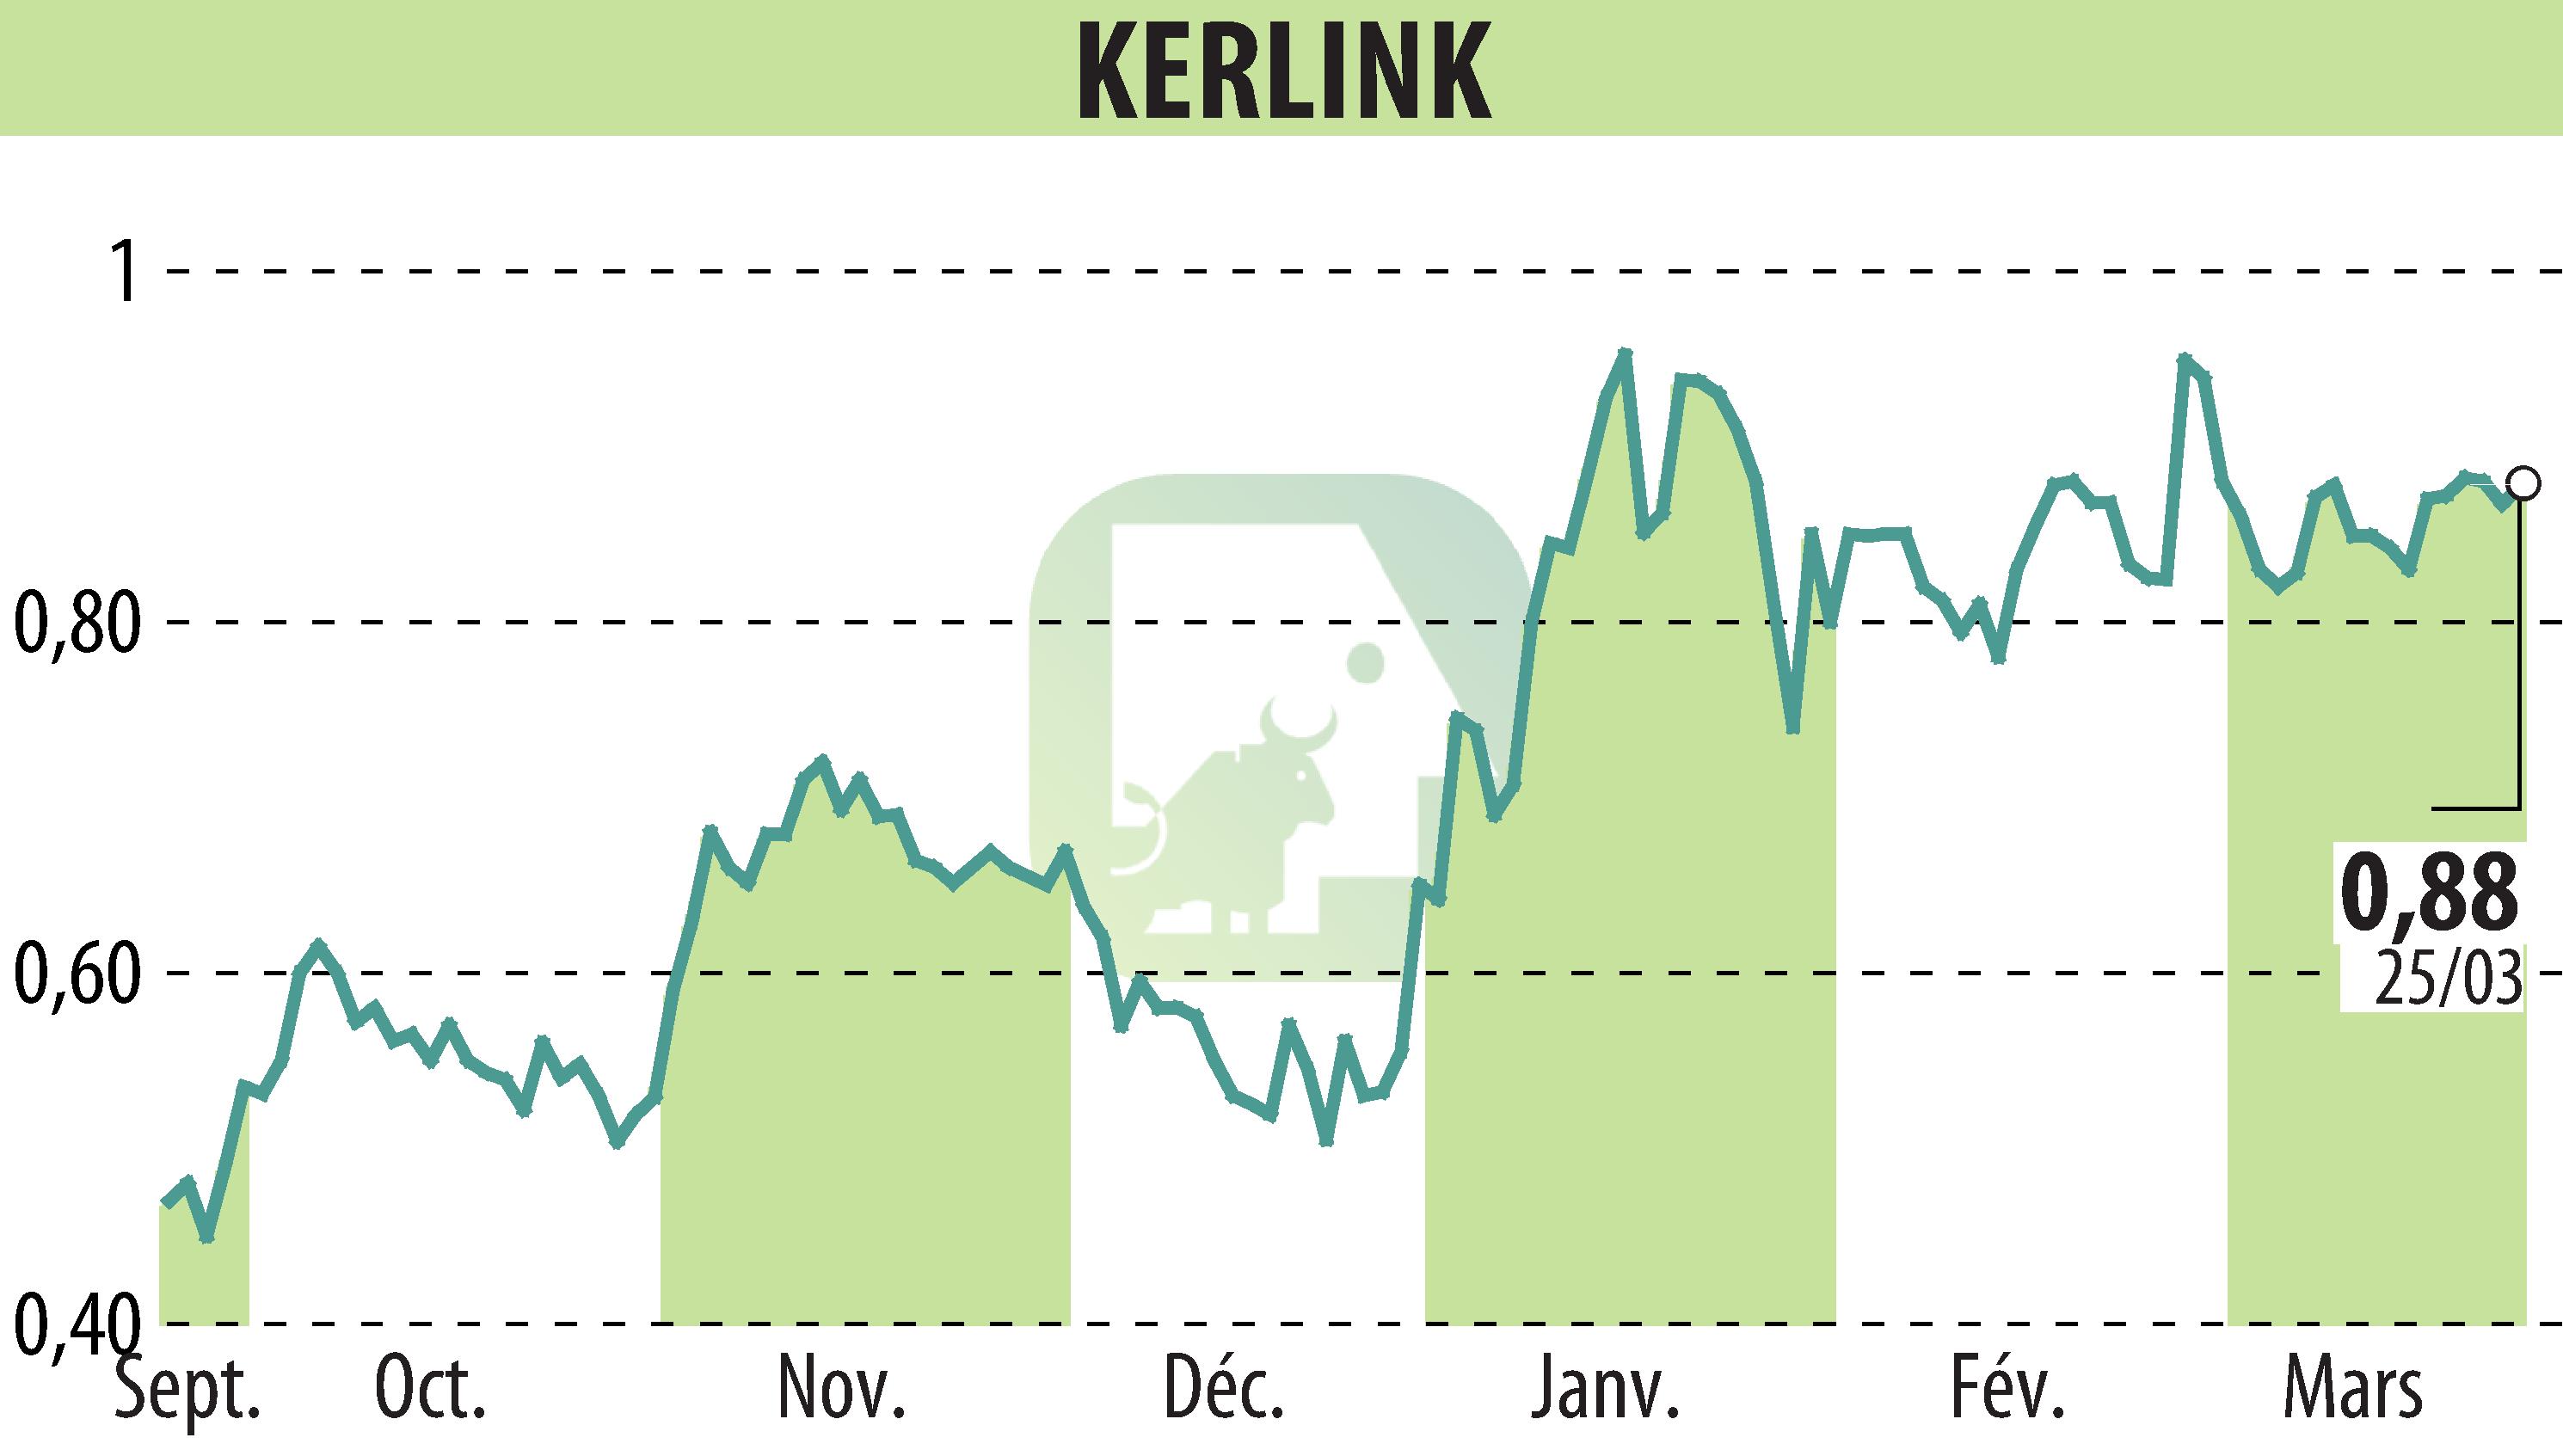 Stock price chart of KERLINK (EPA:ALKLK) showing fluctuations.